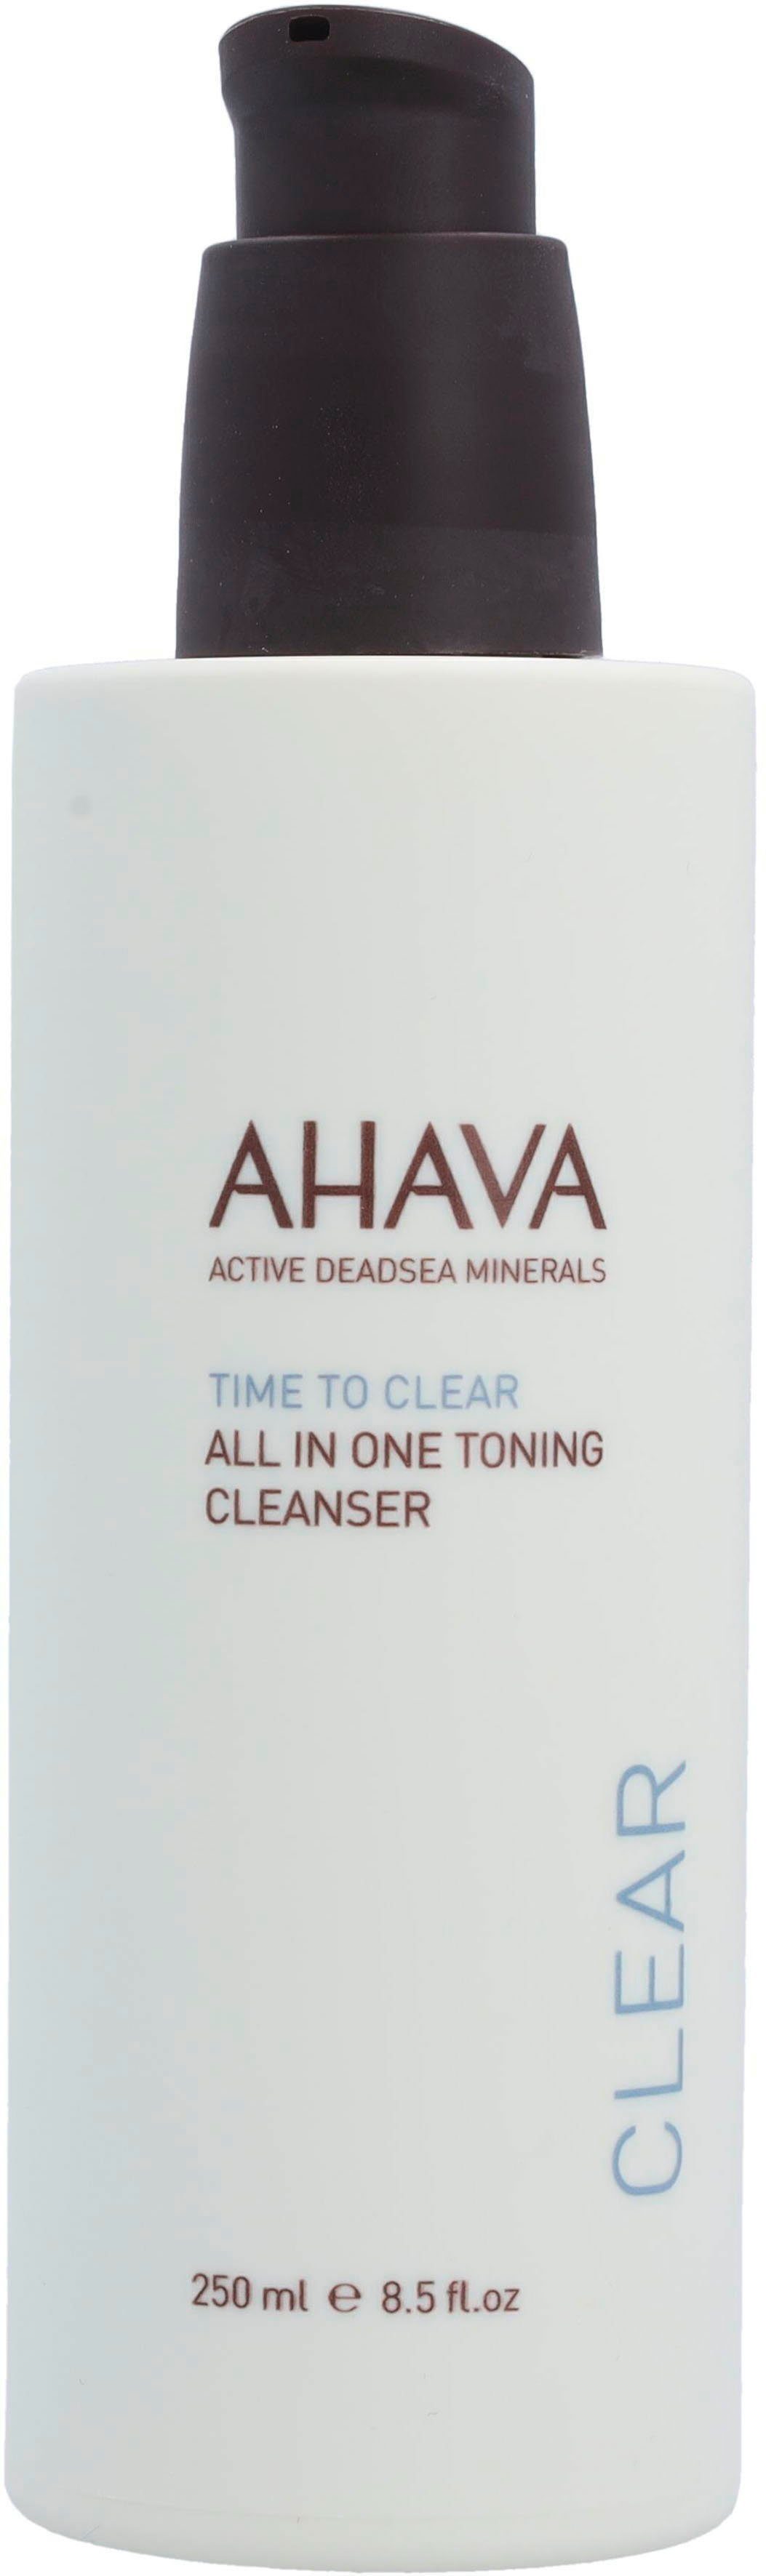 AHAVA Gesichts-Reinigungslotion Time To Clear All In One Toning Cleanser